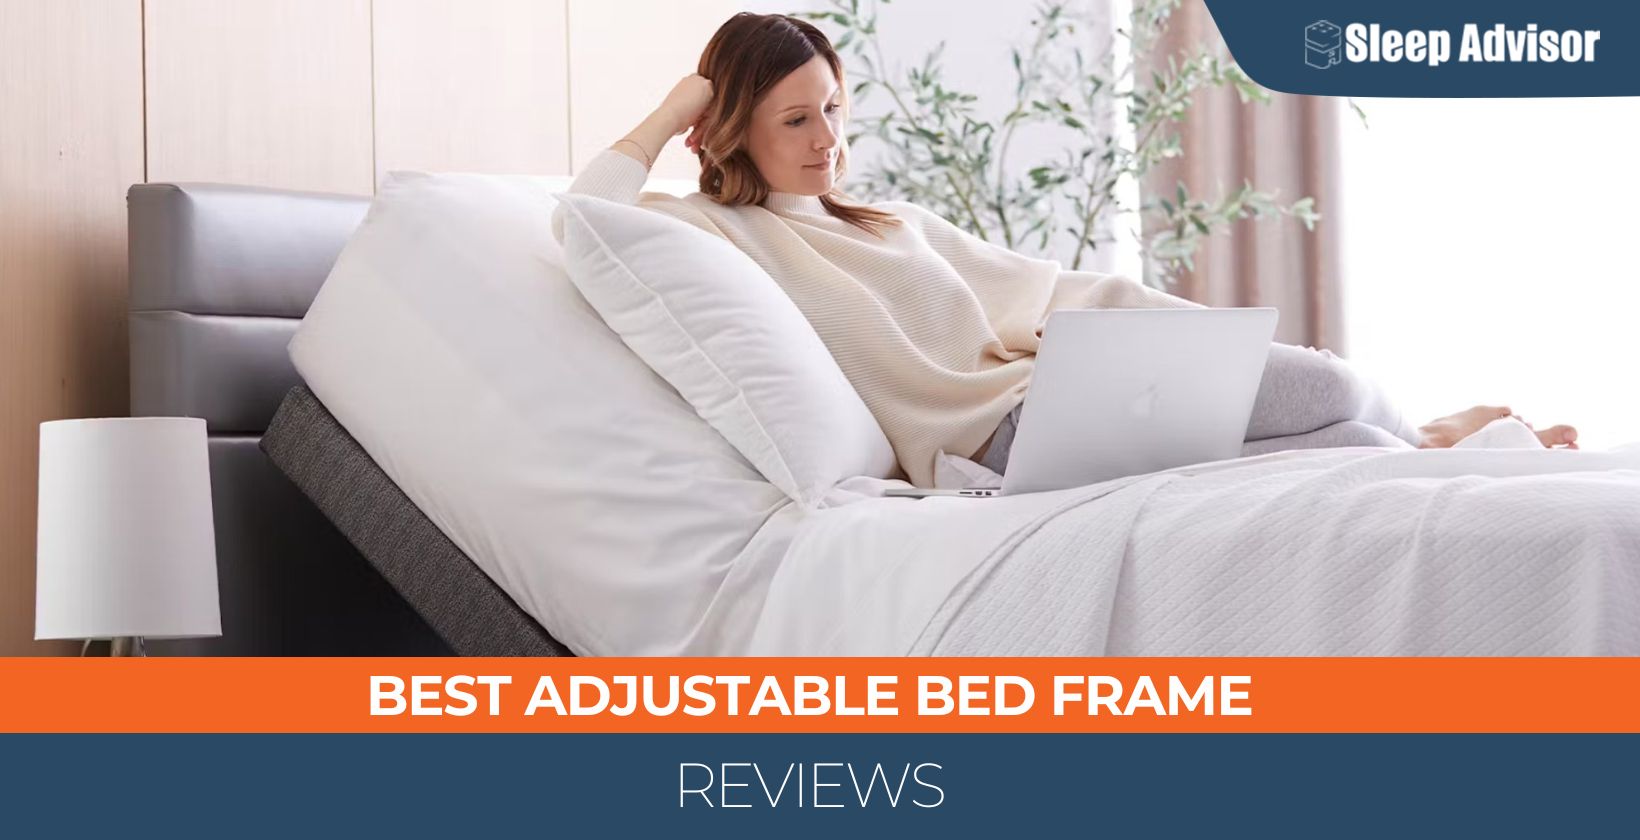 Get Cozy This Fall with the Most Comfortable Adjustable Bed